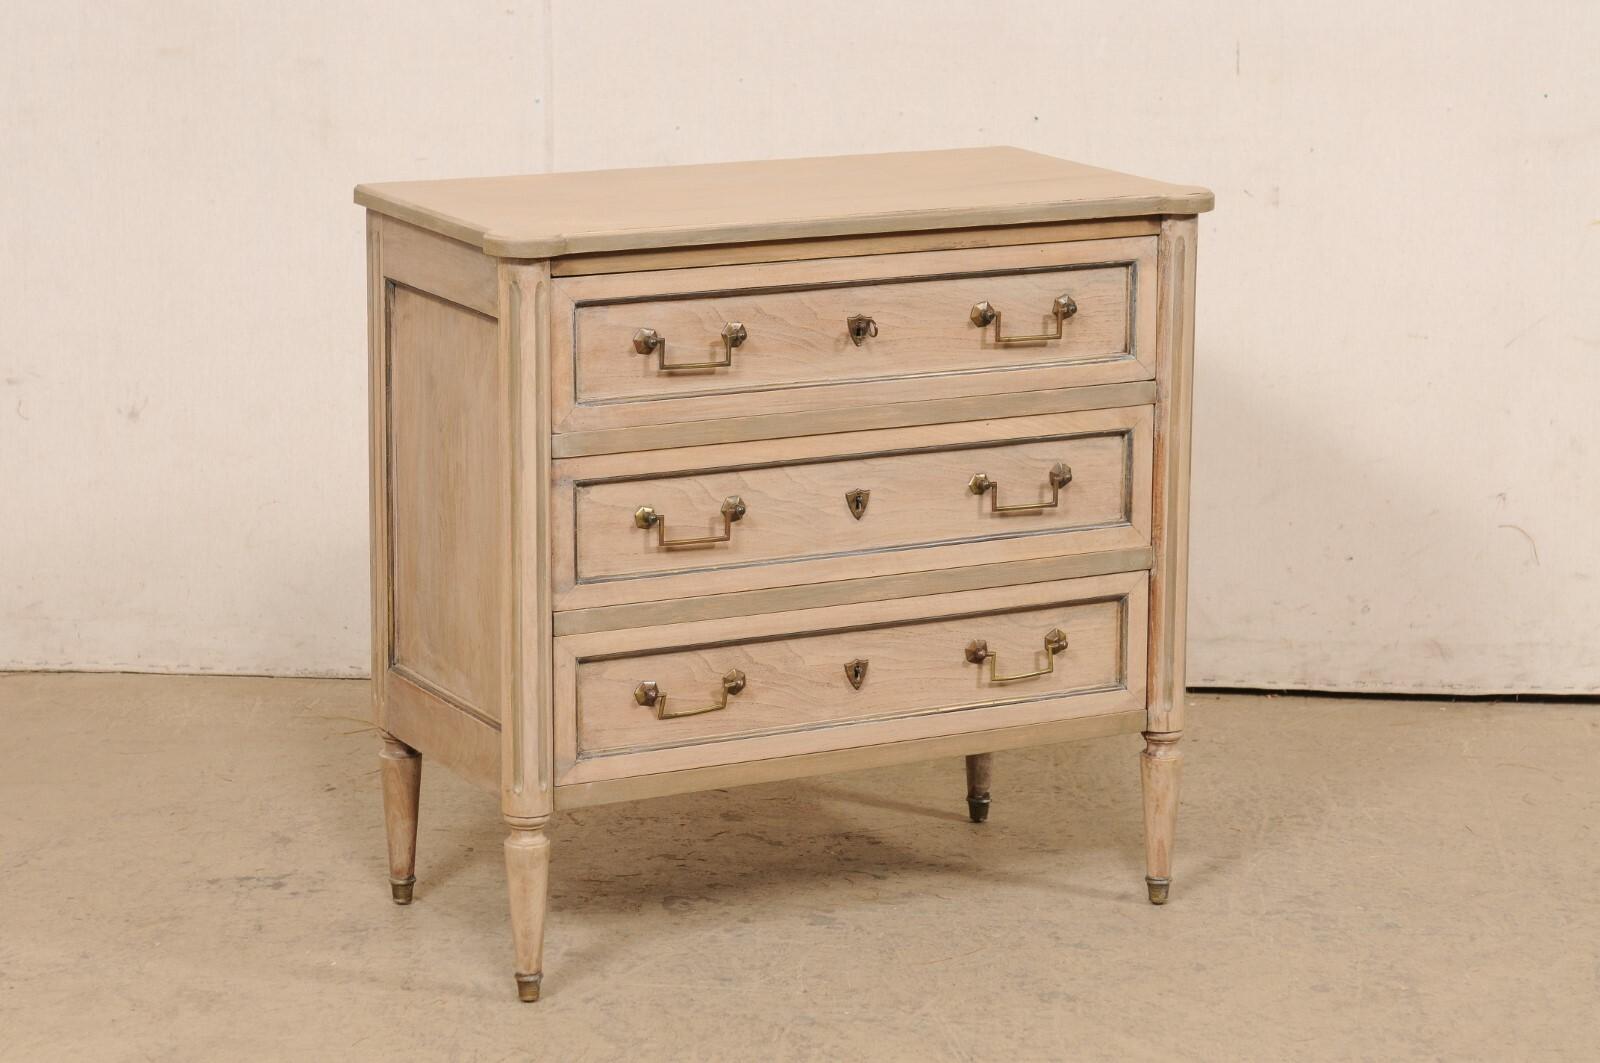 A cute-sized French Neoclassic style chest of drawers from the early 20th century. This antique chest from France features a rectangular-shaped top with pronounced and rounded front corners, which rests atop a neoclassical style case with rounded